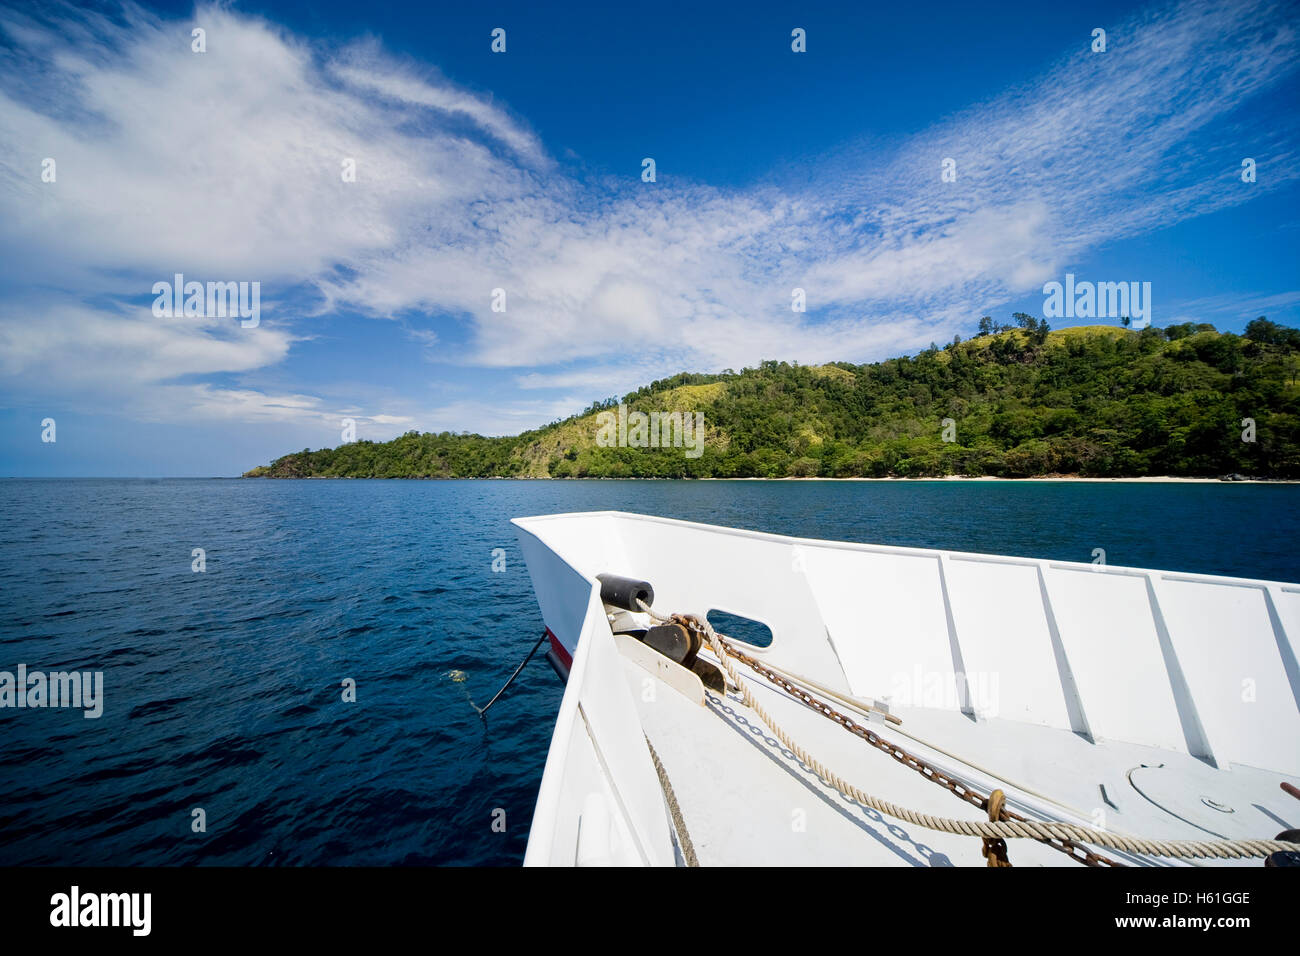 Bow of a boat in front of tropical landscape, Sulawesi, Indonesia, Southeast Asia Stock Photo